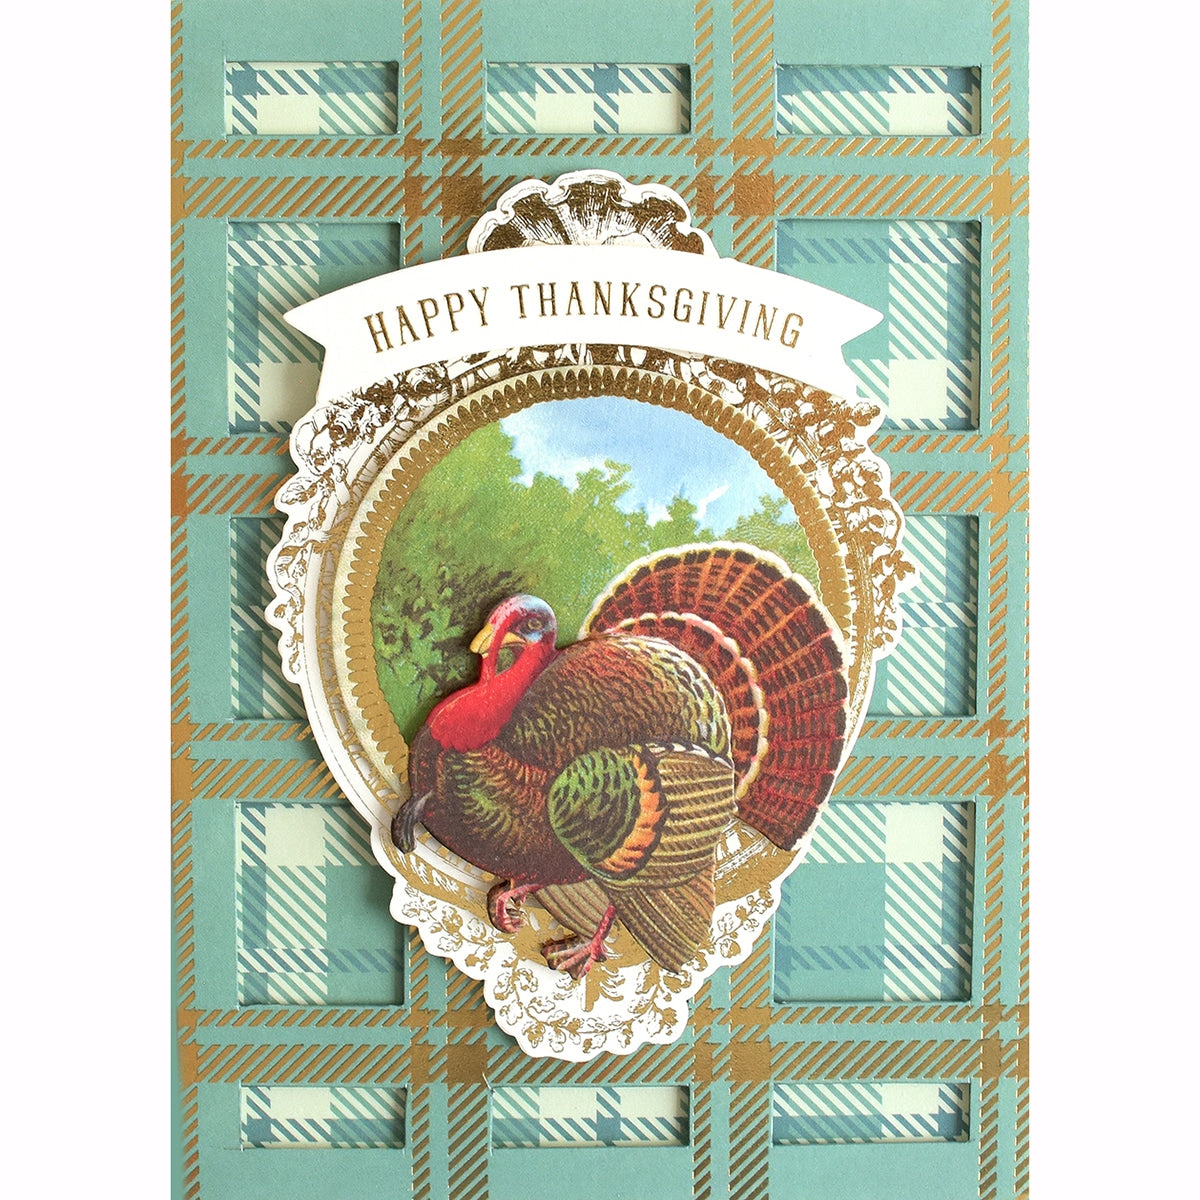 A Fall Plaid 12x12 Cardstock with a turkey on a plaid background.